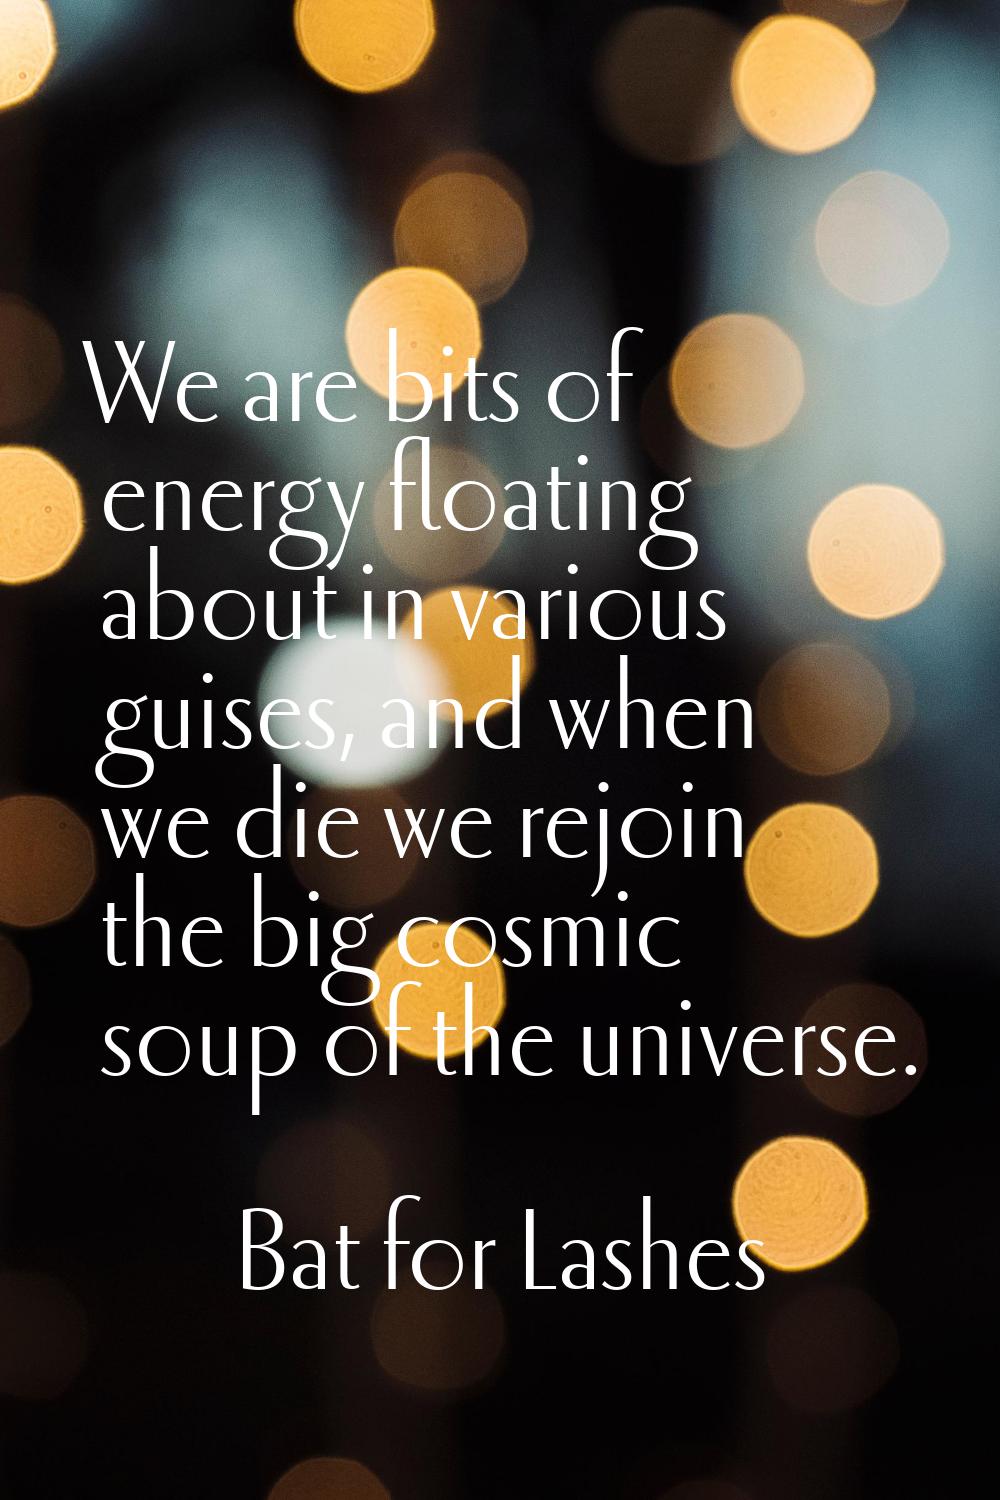 We are bits of energy floating about in various guises, and when we die we rejoin the big cosmic so